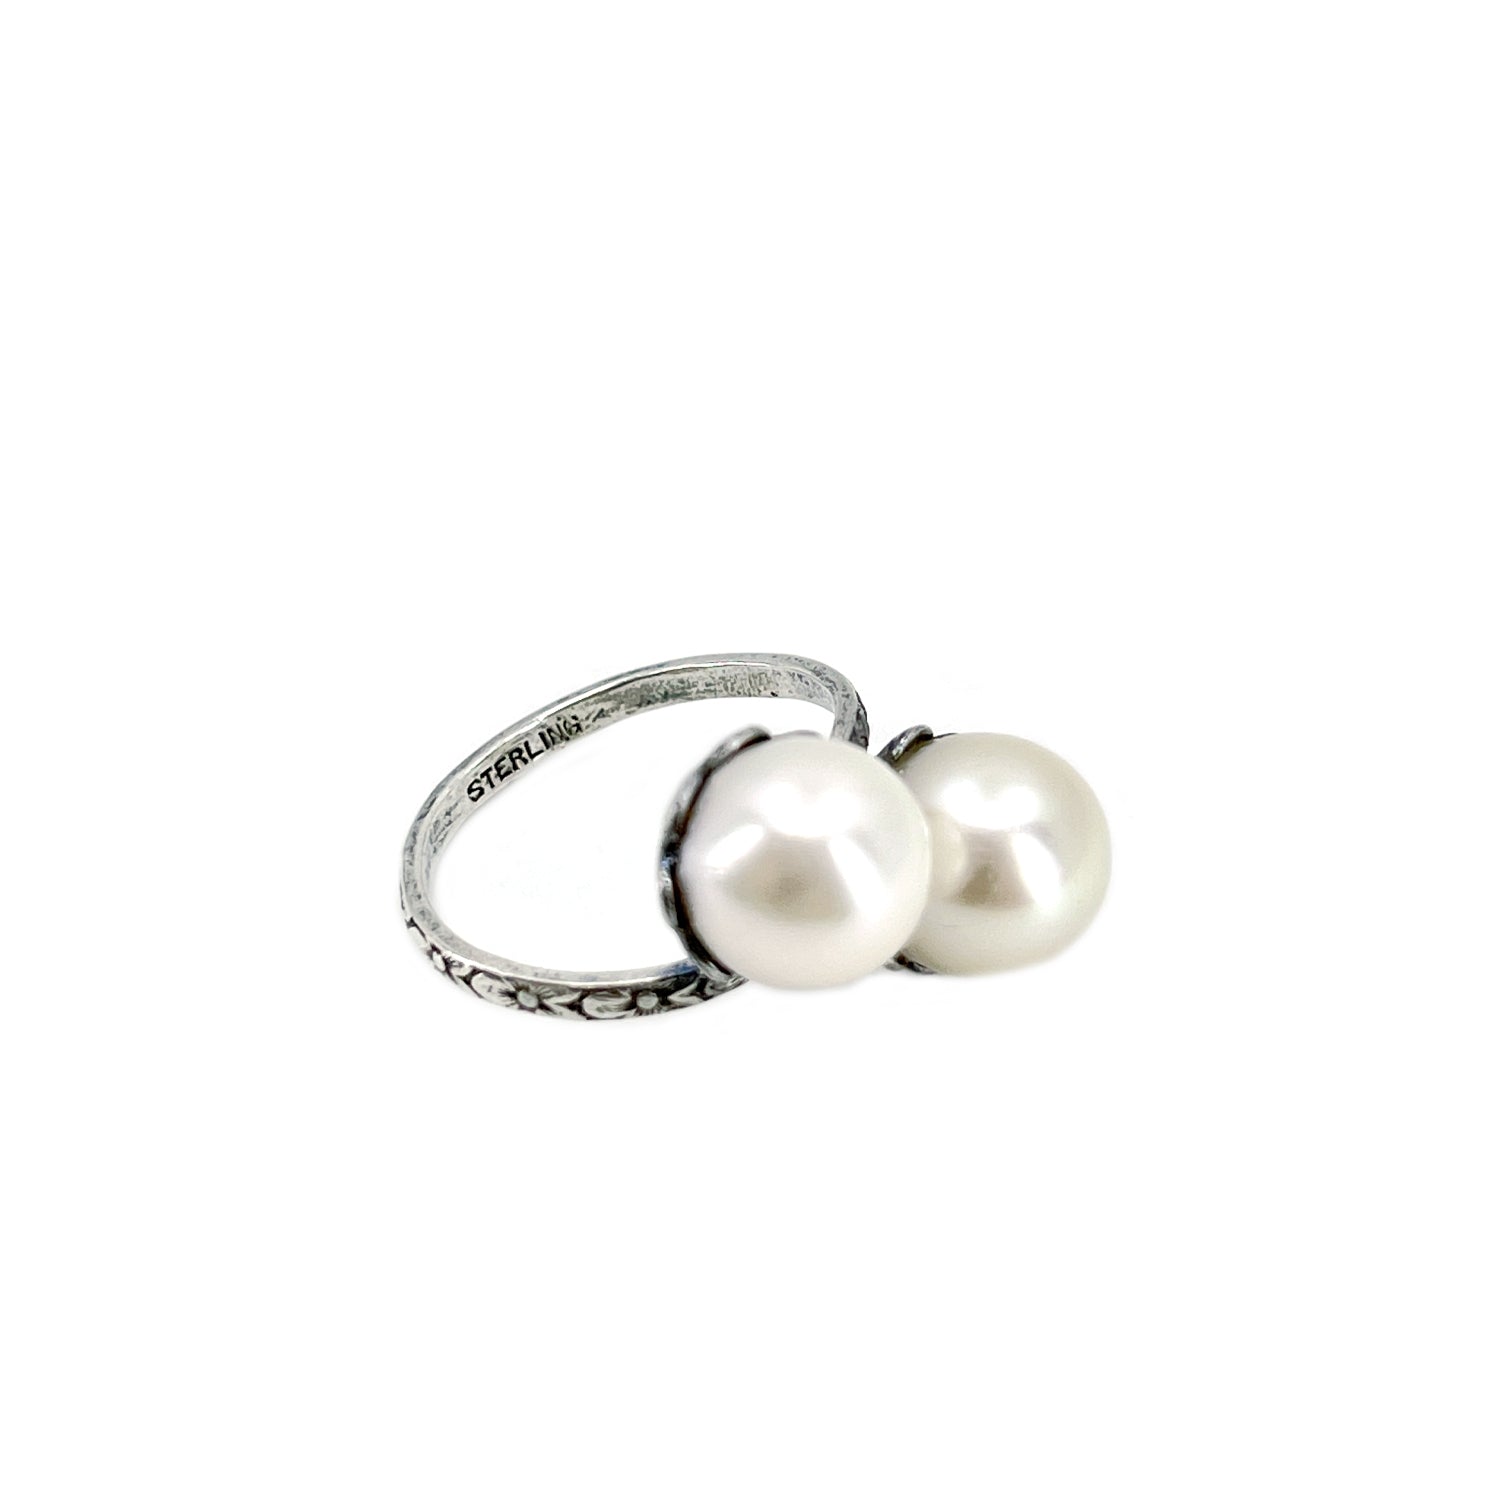 Deco Bypass Floral Japanese Saltwater Cultured Akoya Vintage Pearl Ring- Sterling Silver Sz 4